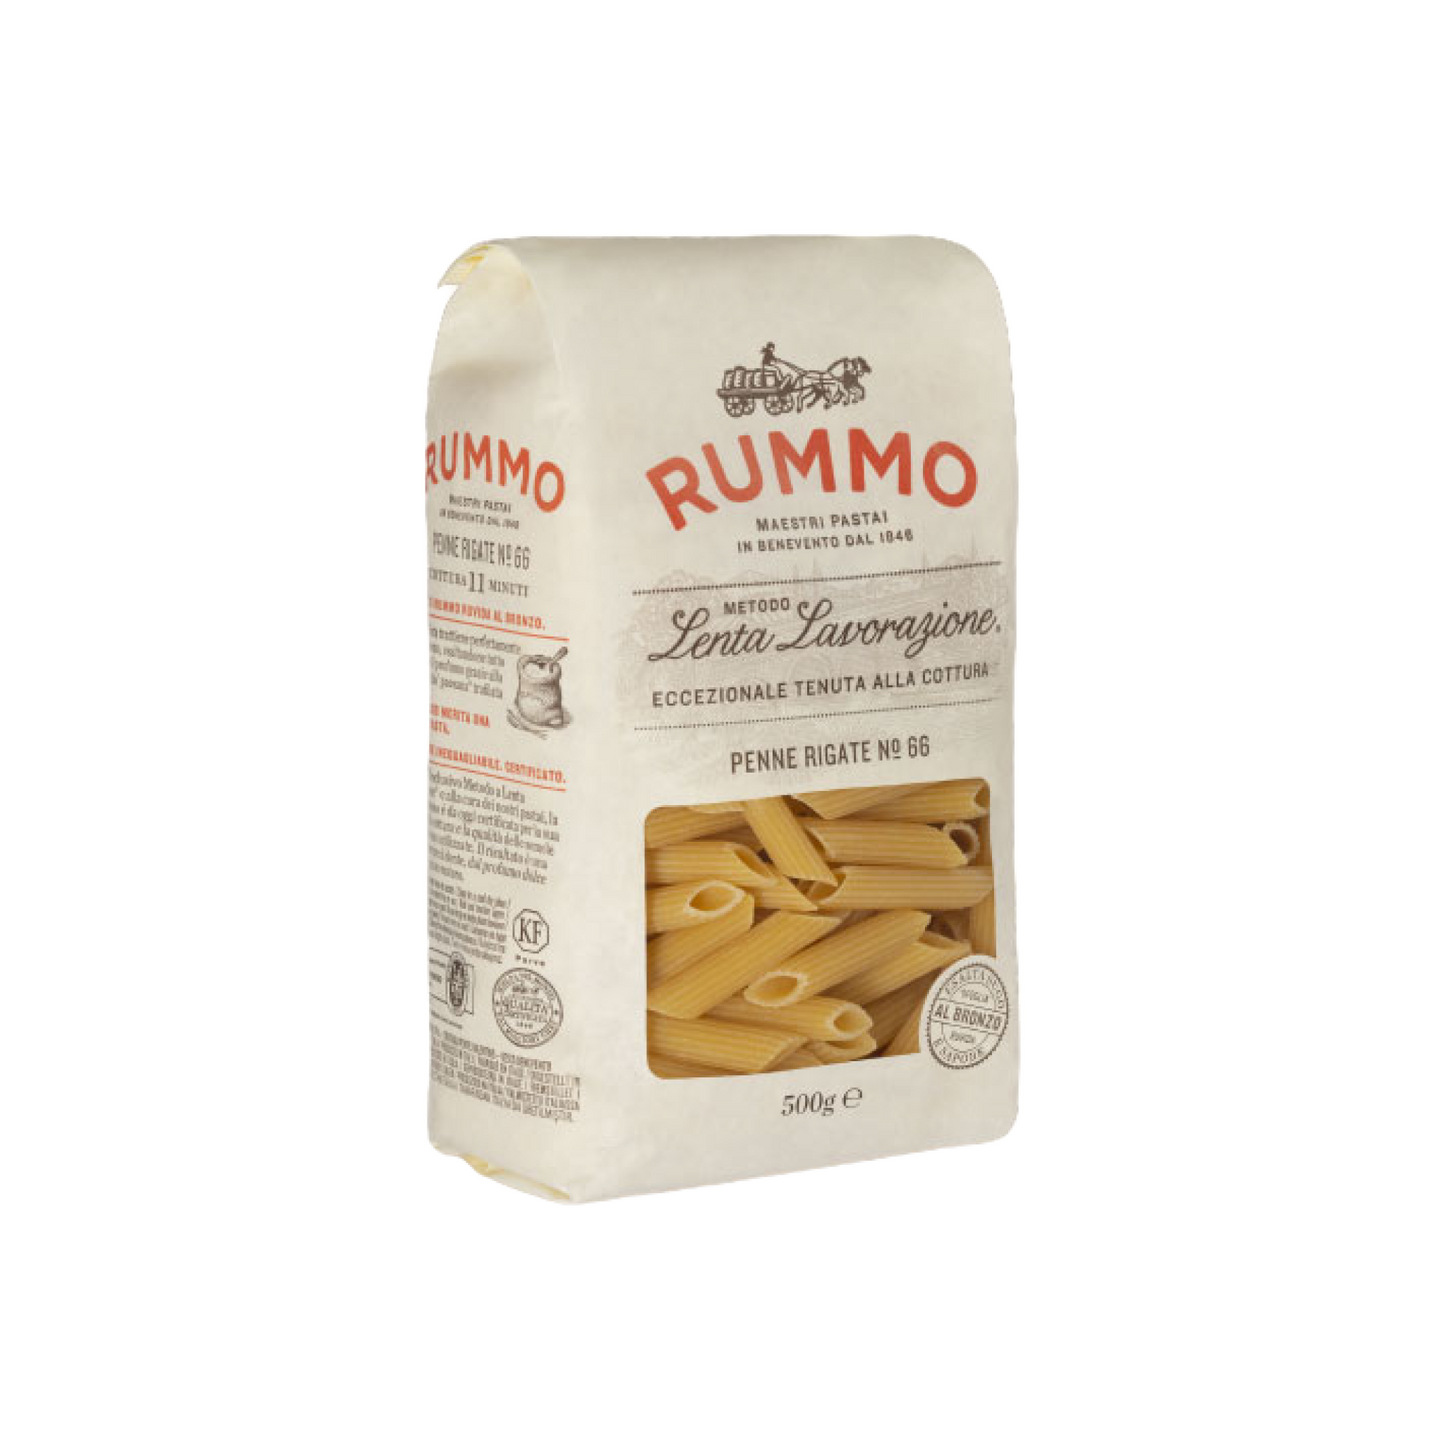 Rummo Penne Rigate No 66 500g